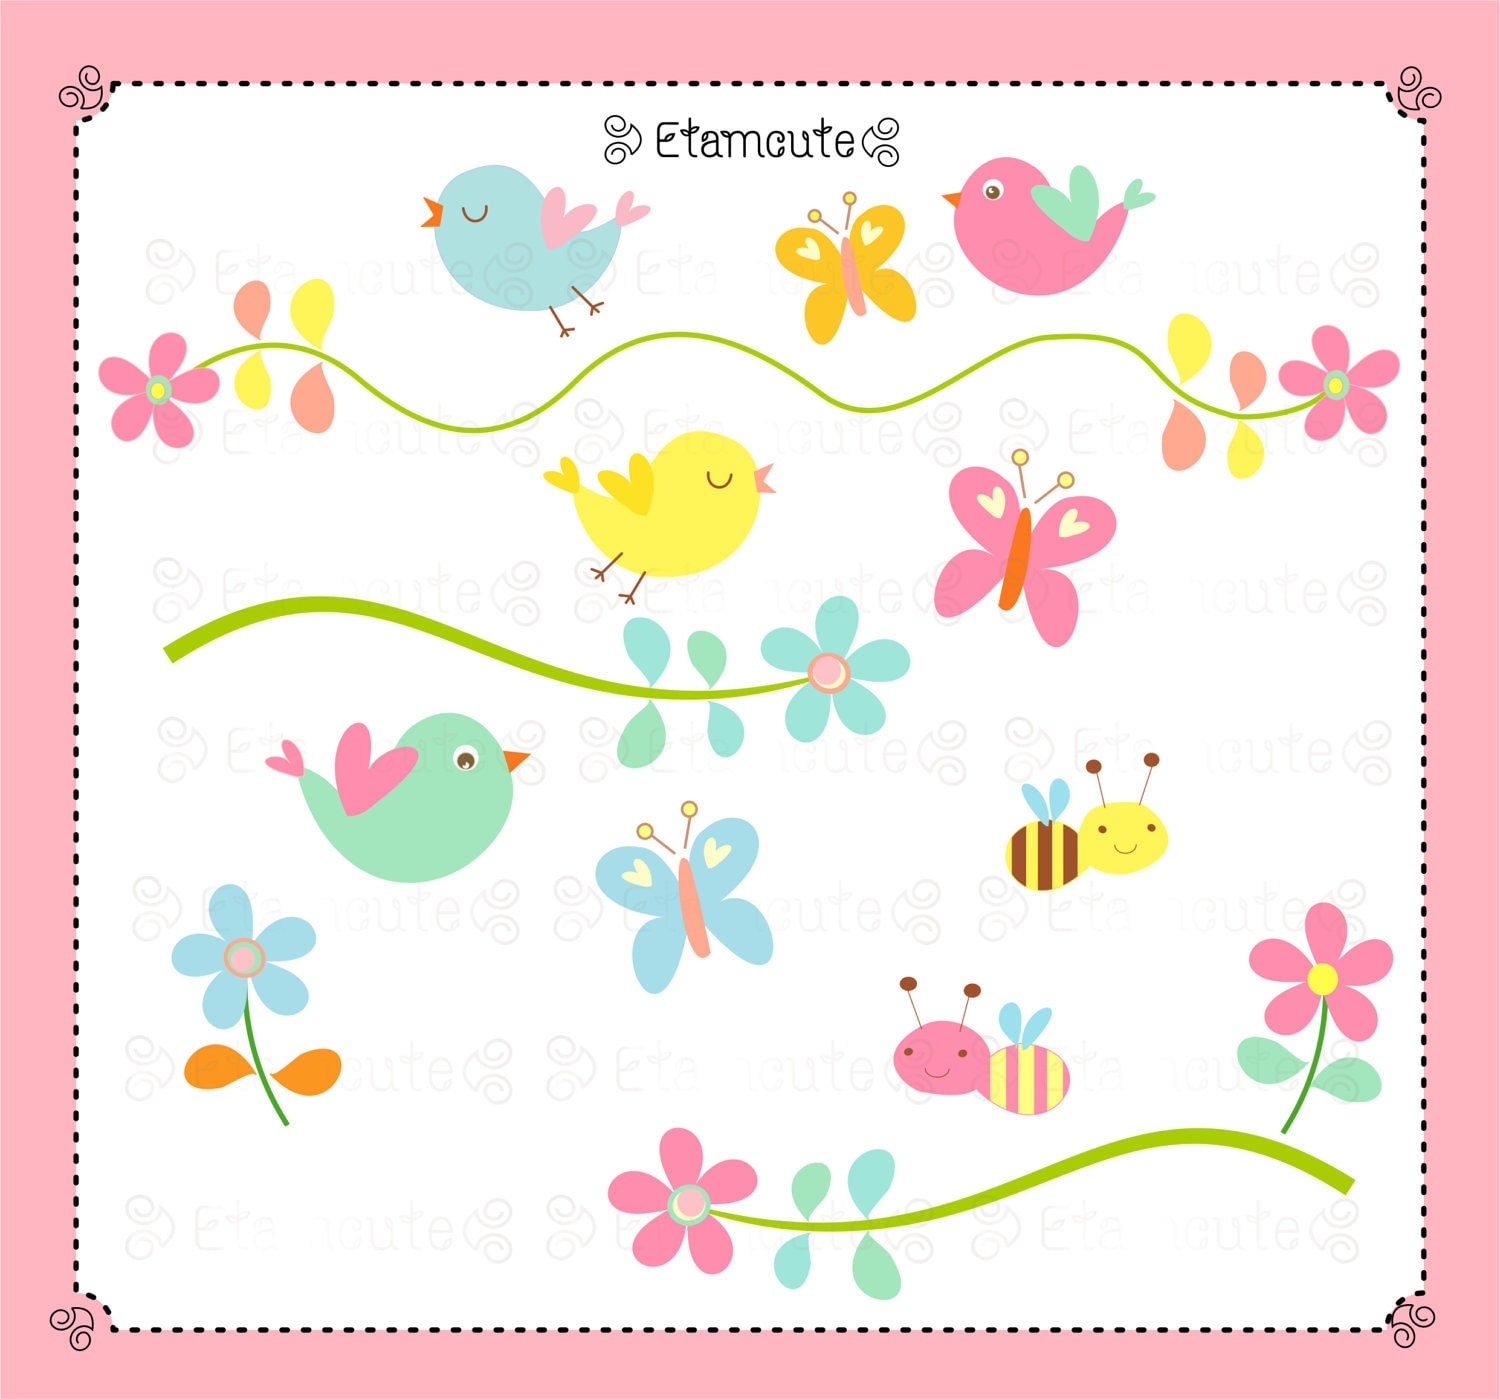 Butterflies And Flowers Clipart